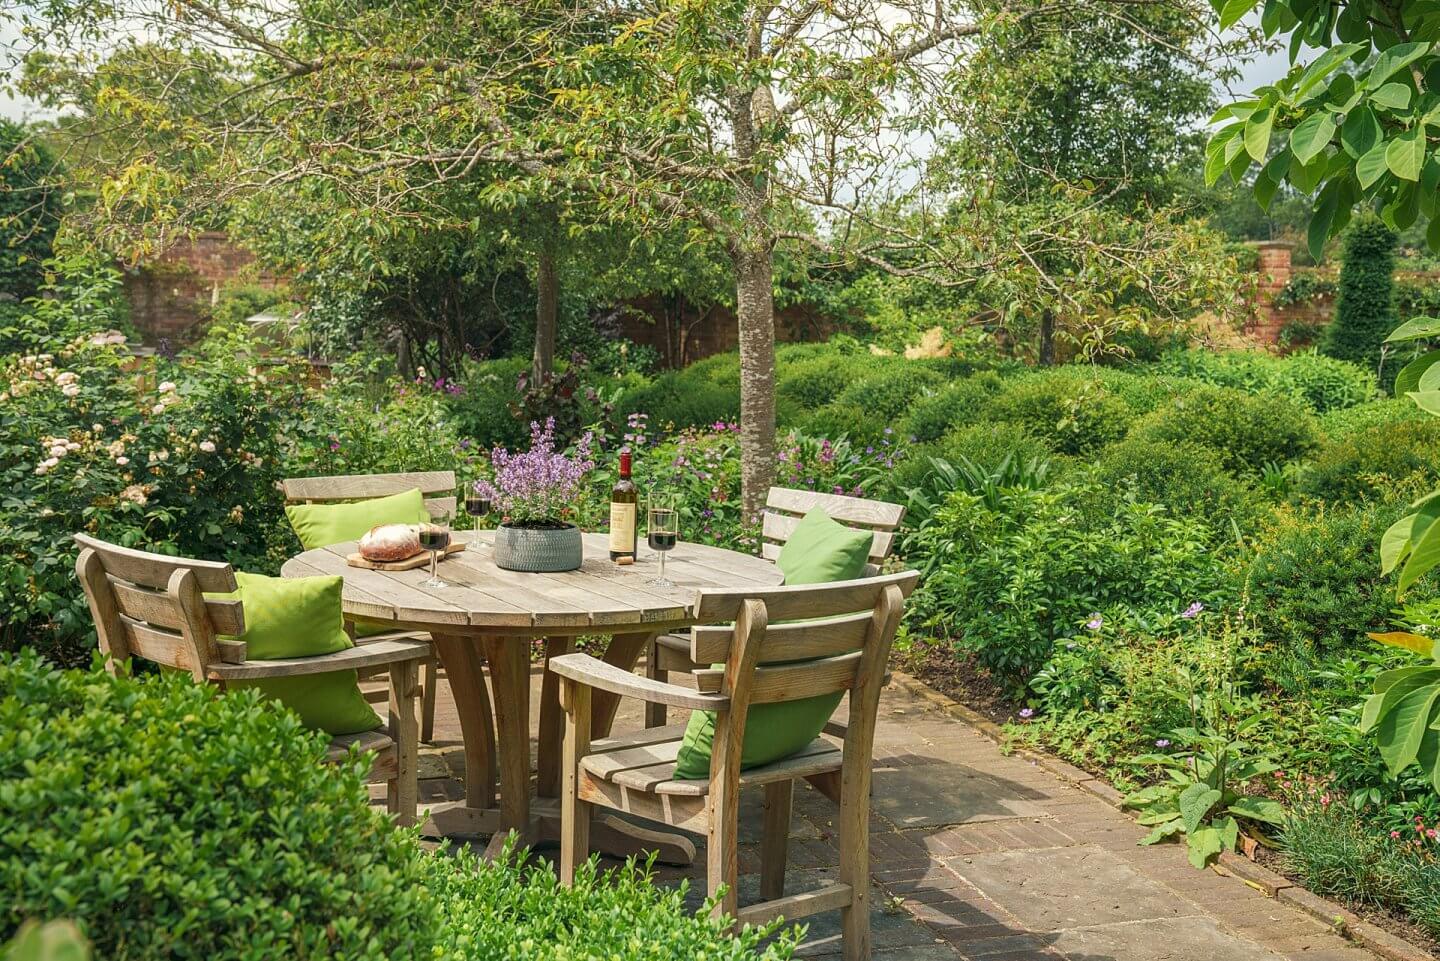 Bailey table and chairs wooden handcrafted in the UK in an English country garden